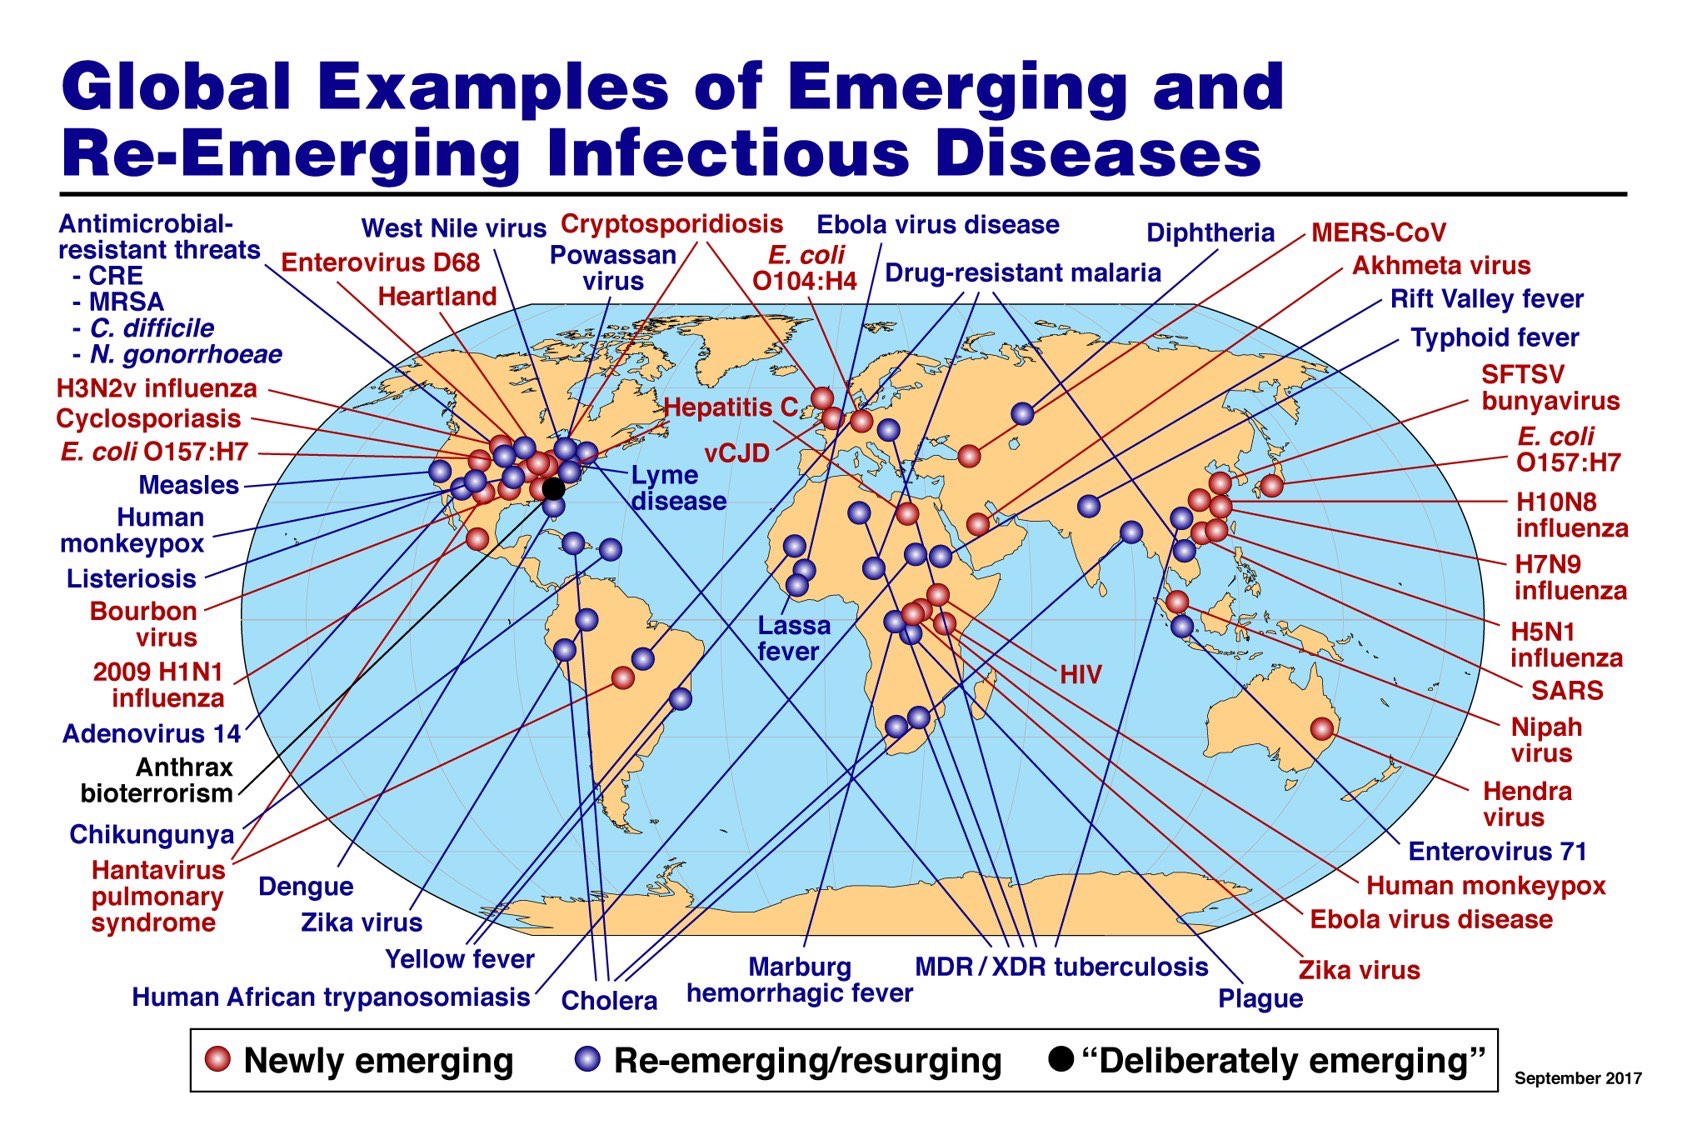 Global Examples of Emerging and Re-Emerging Infectious Diseases